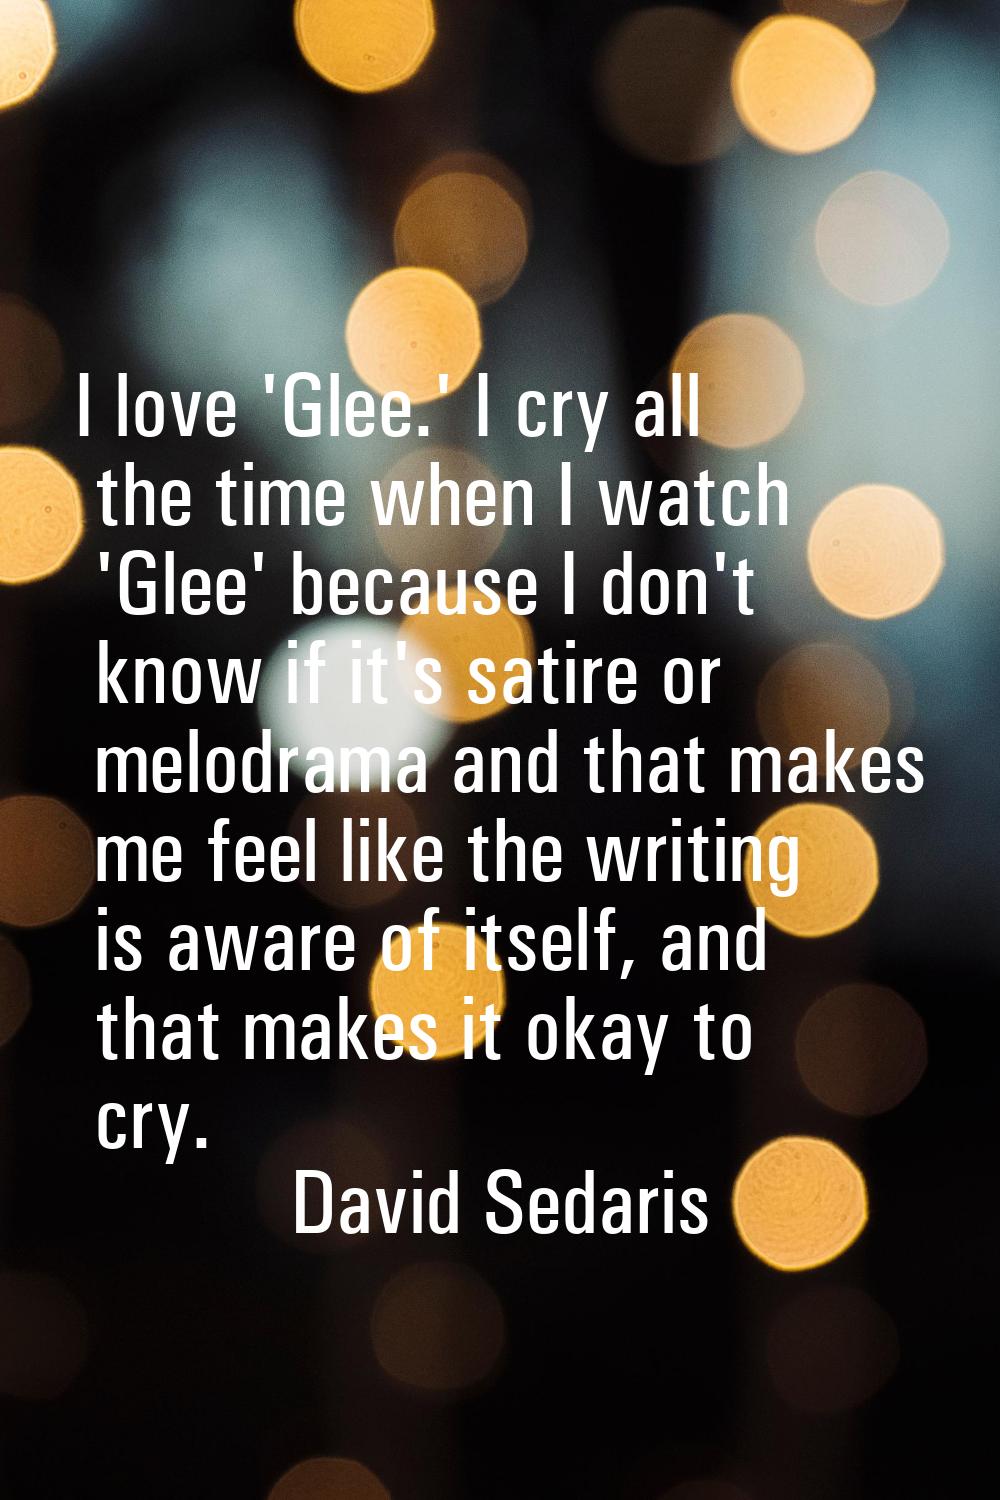 I love 'Glee.' I cry all the time when I watch 'Glee' because I don't know if it's satire or melodr